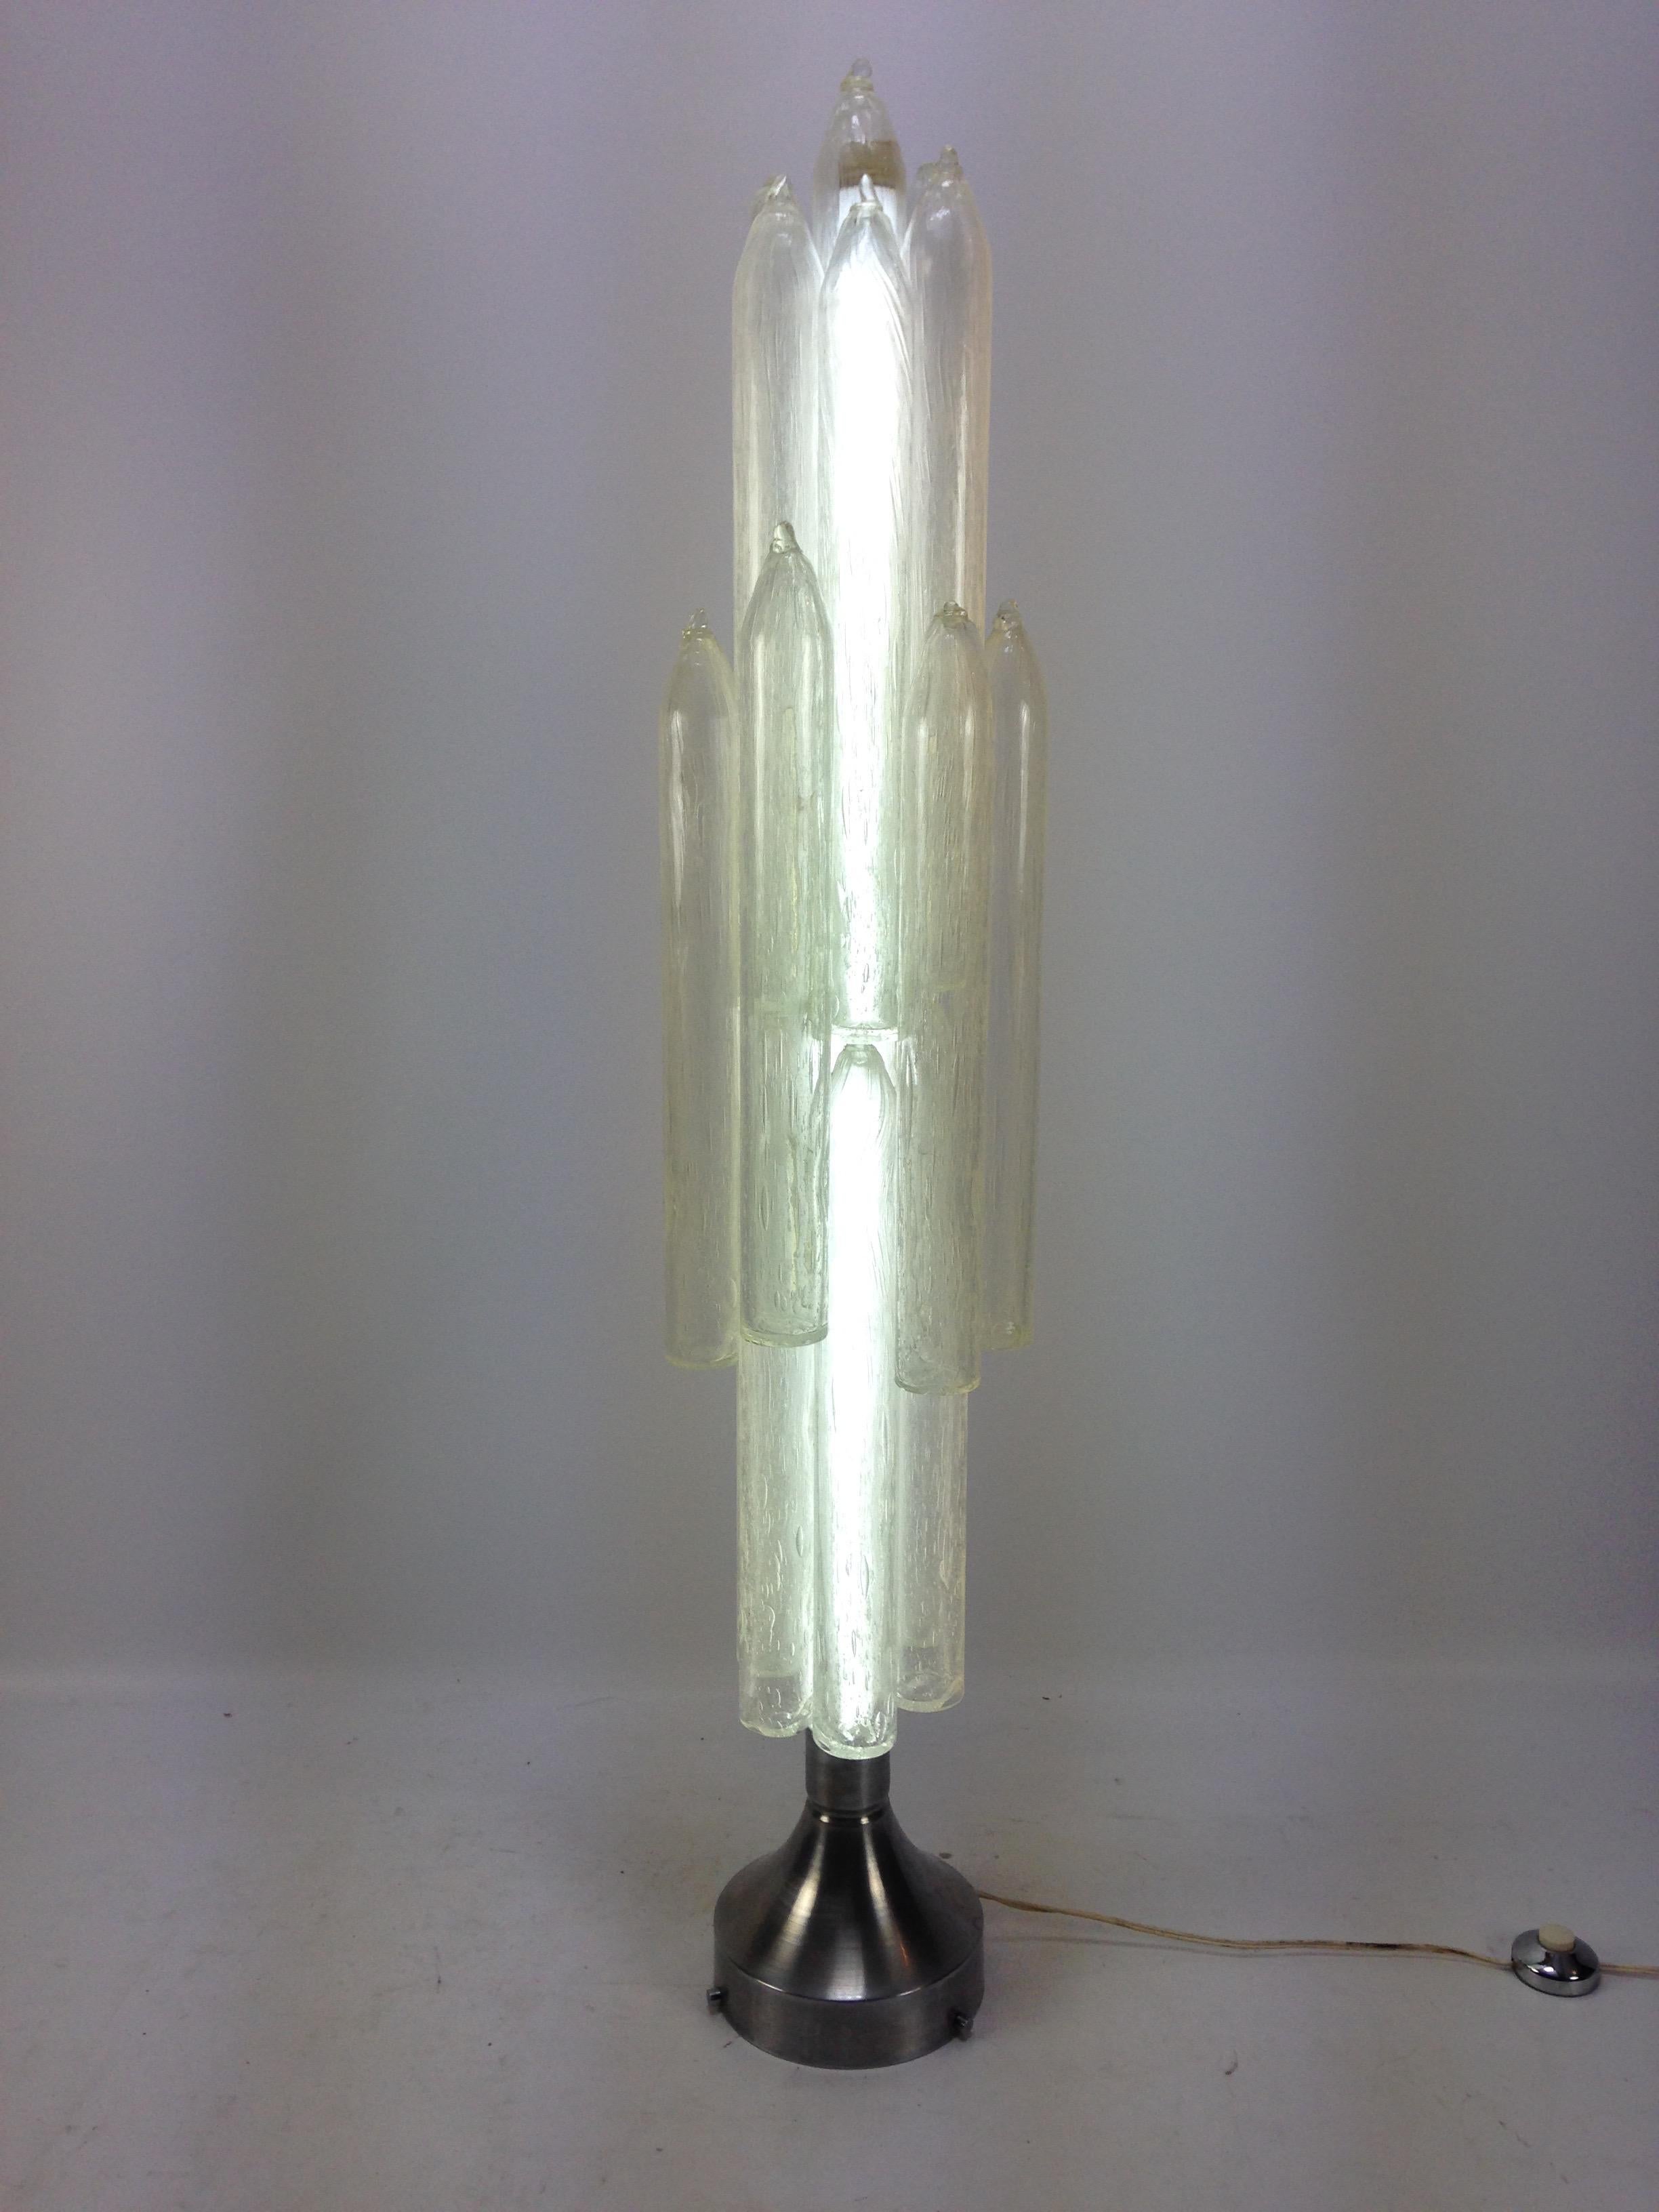 Very rare and decorative Mazzega Murano glass lamp attributed to Carlo Nason from the Mid-Century Modern Space Age period. 
Italy, 1960-1970.

Handblown Mazzega glass cylinders joined together with space rocket shape creating an amazing